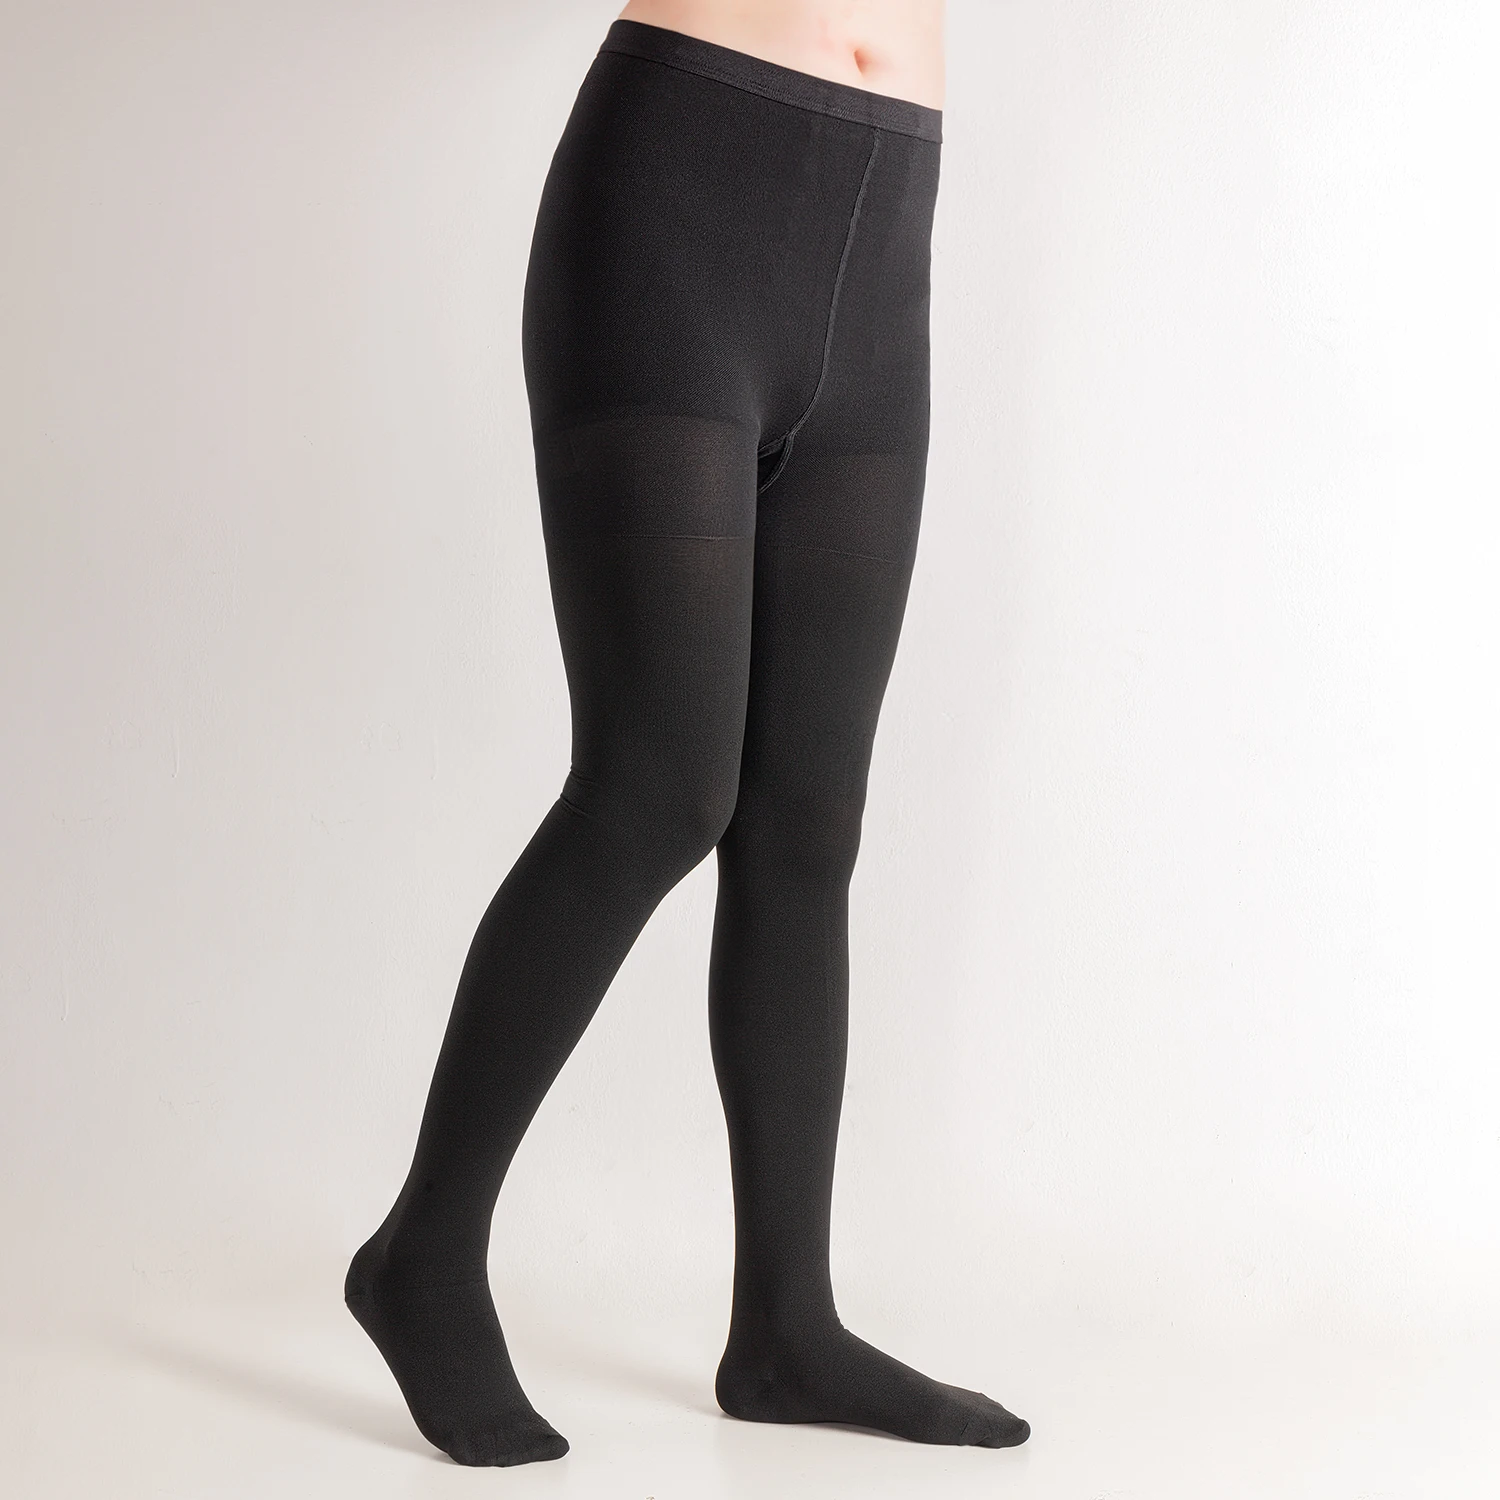 Circulation Clinic  Compression stockings